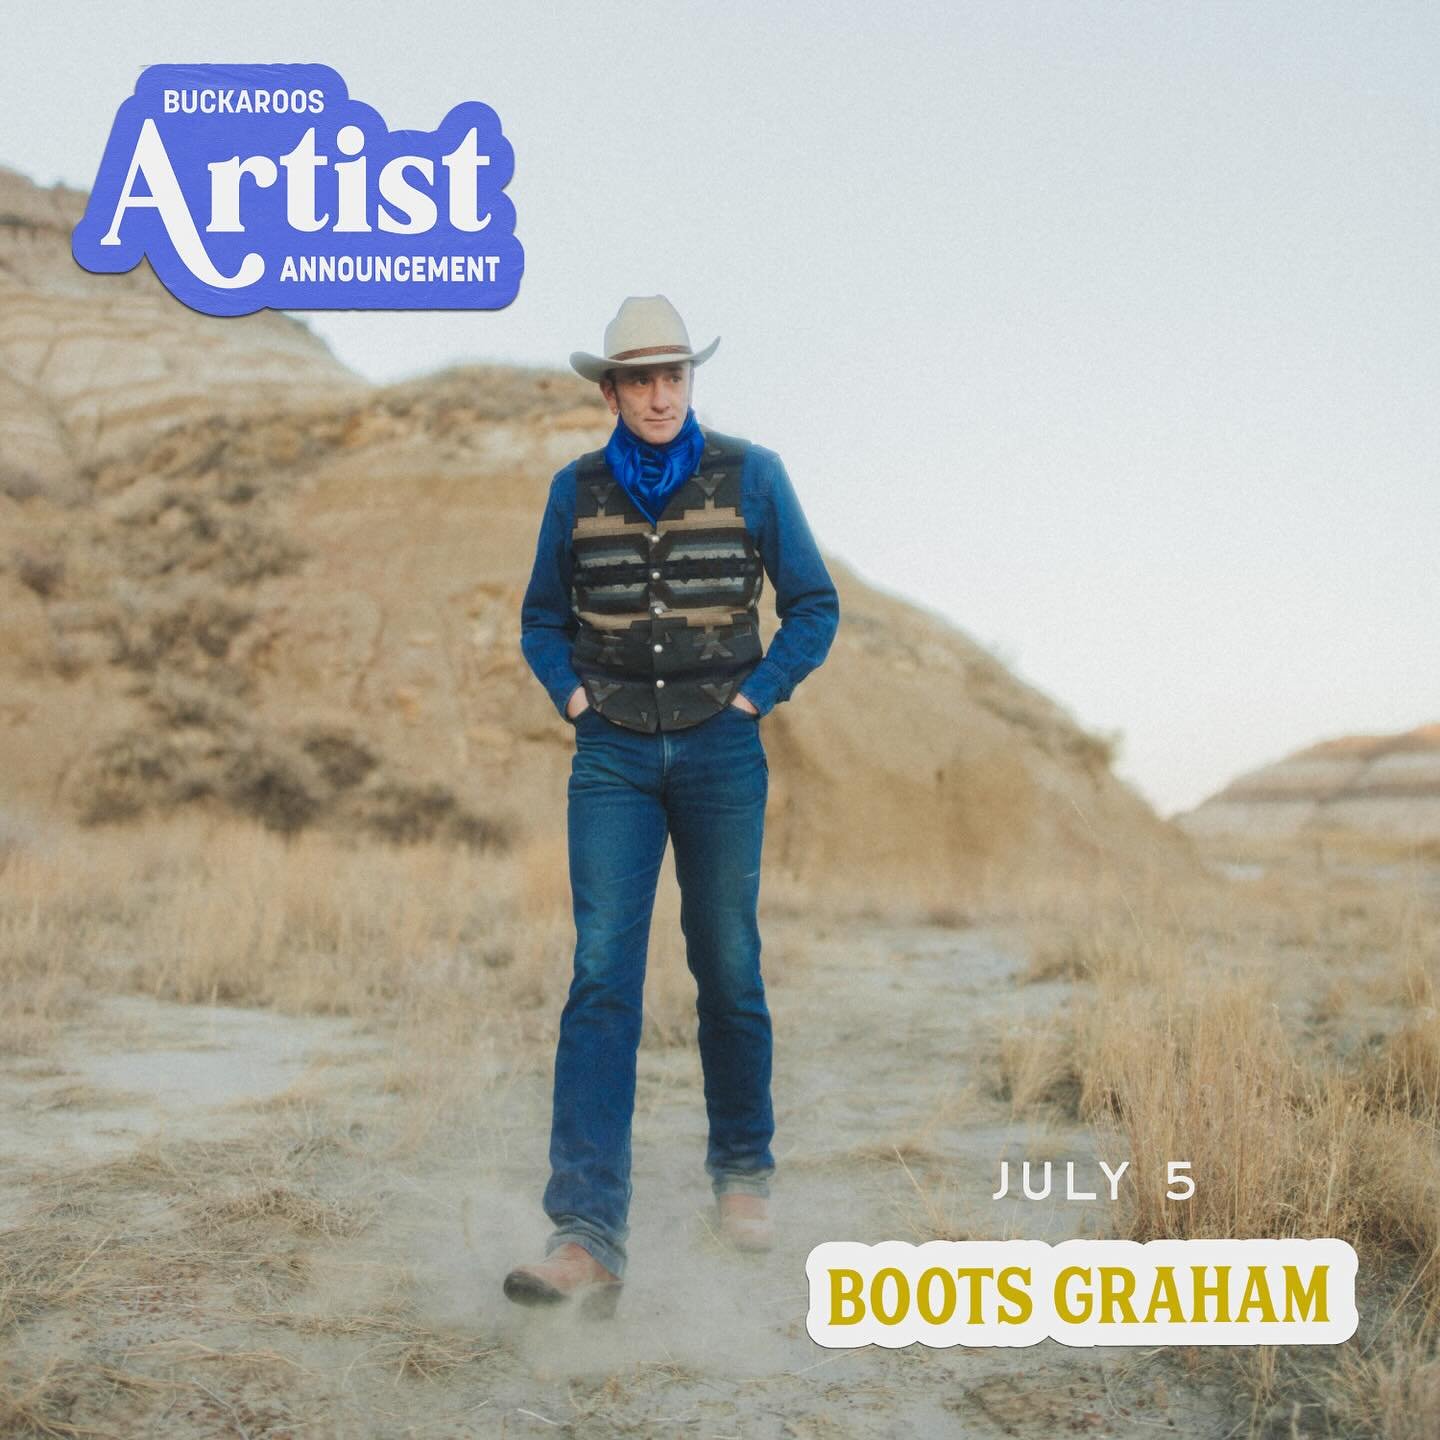 FRIDAY JULY 5 🐎

Joining the line up for our official Kick-Off in collaboration with Good Gals Vintage &amp; The Littlest Honky Tonk is artist Boots Graham.

Boots has an original sound that connects with the upbeat roots of country music with the c